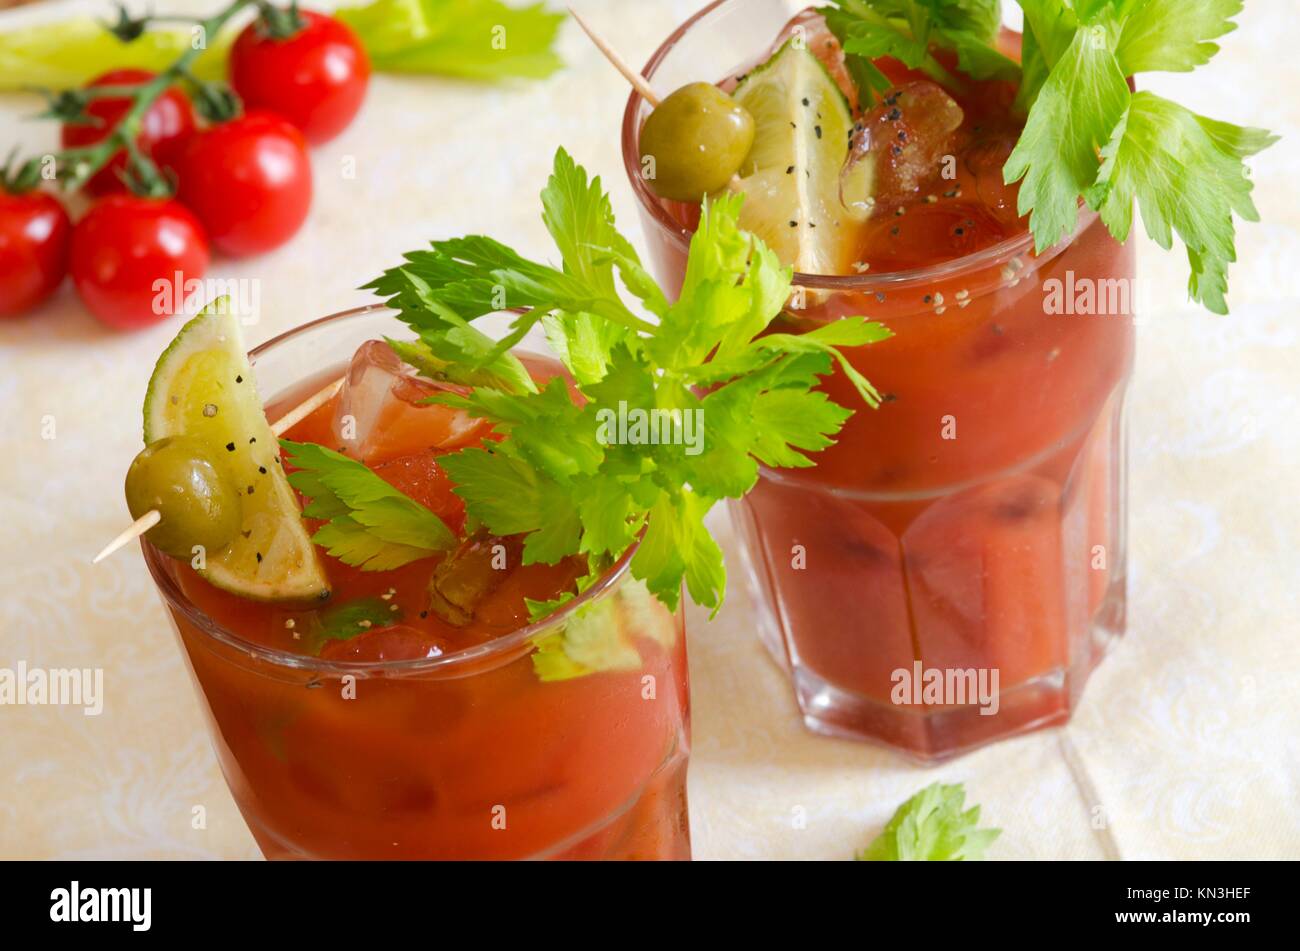 Freshly made Bloody Mary cocktail in a glass. Stock Photo